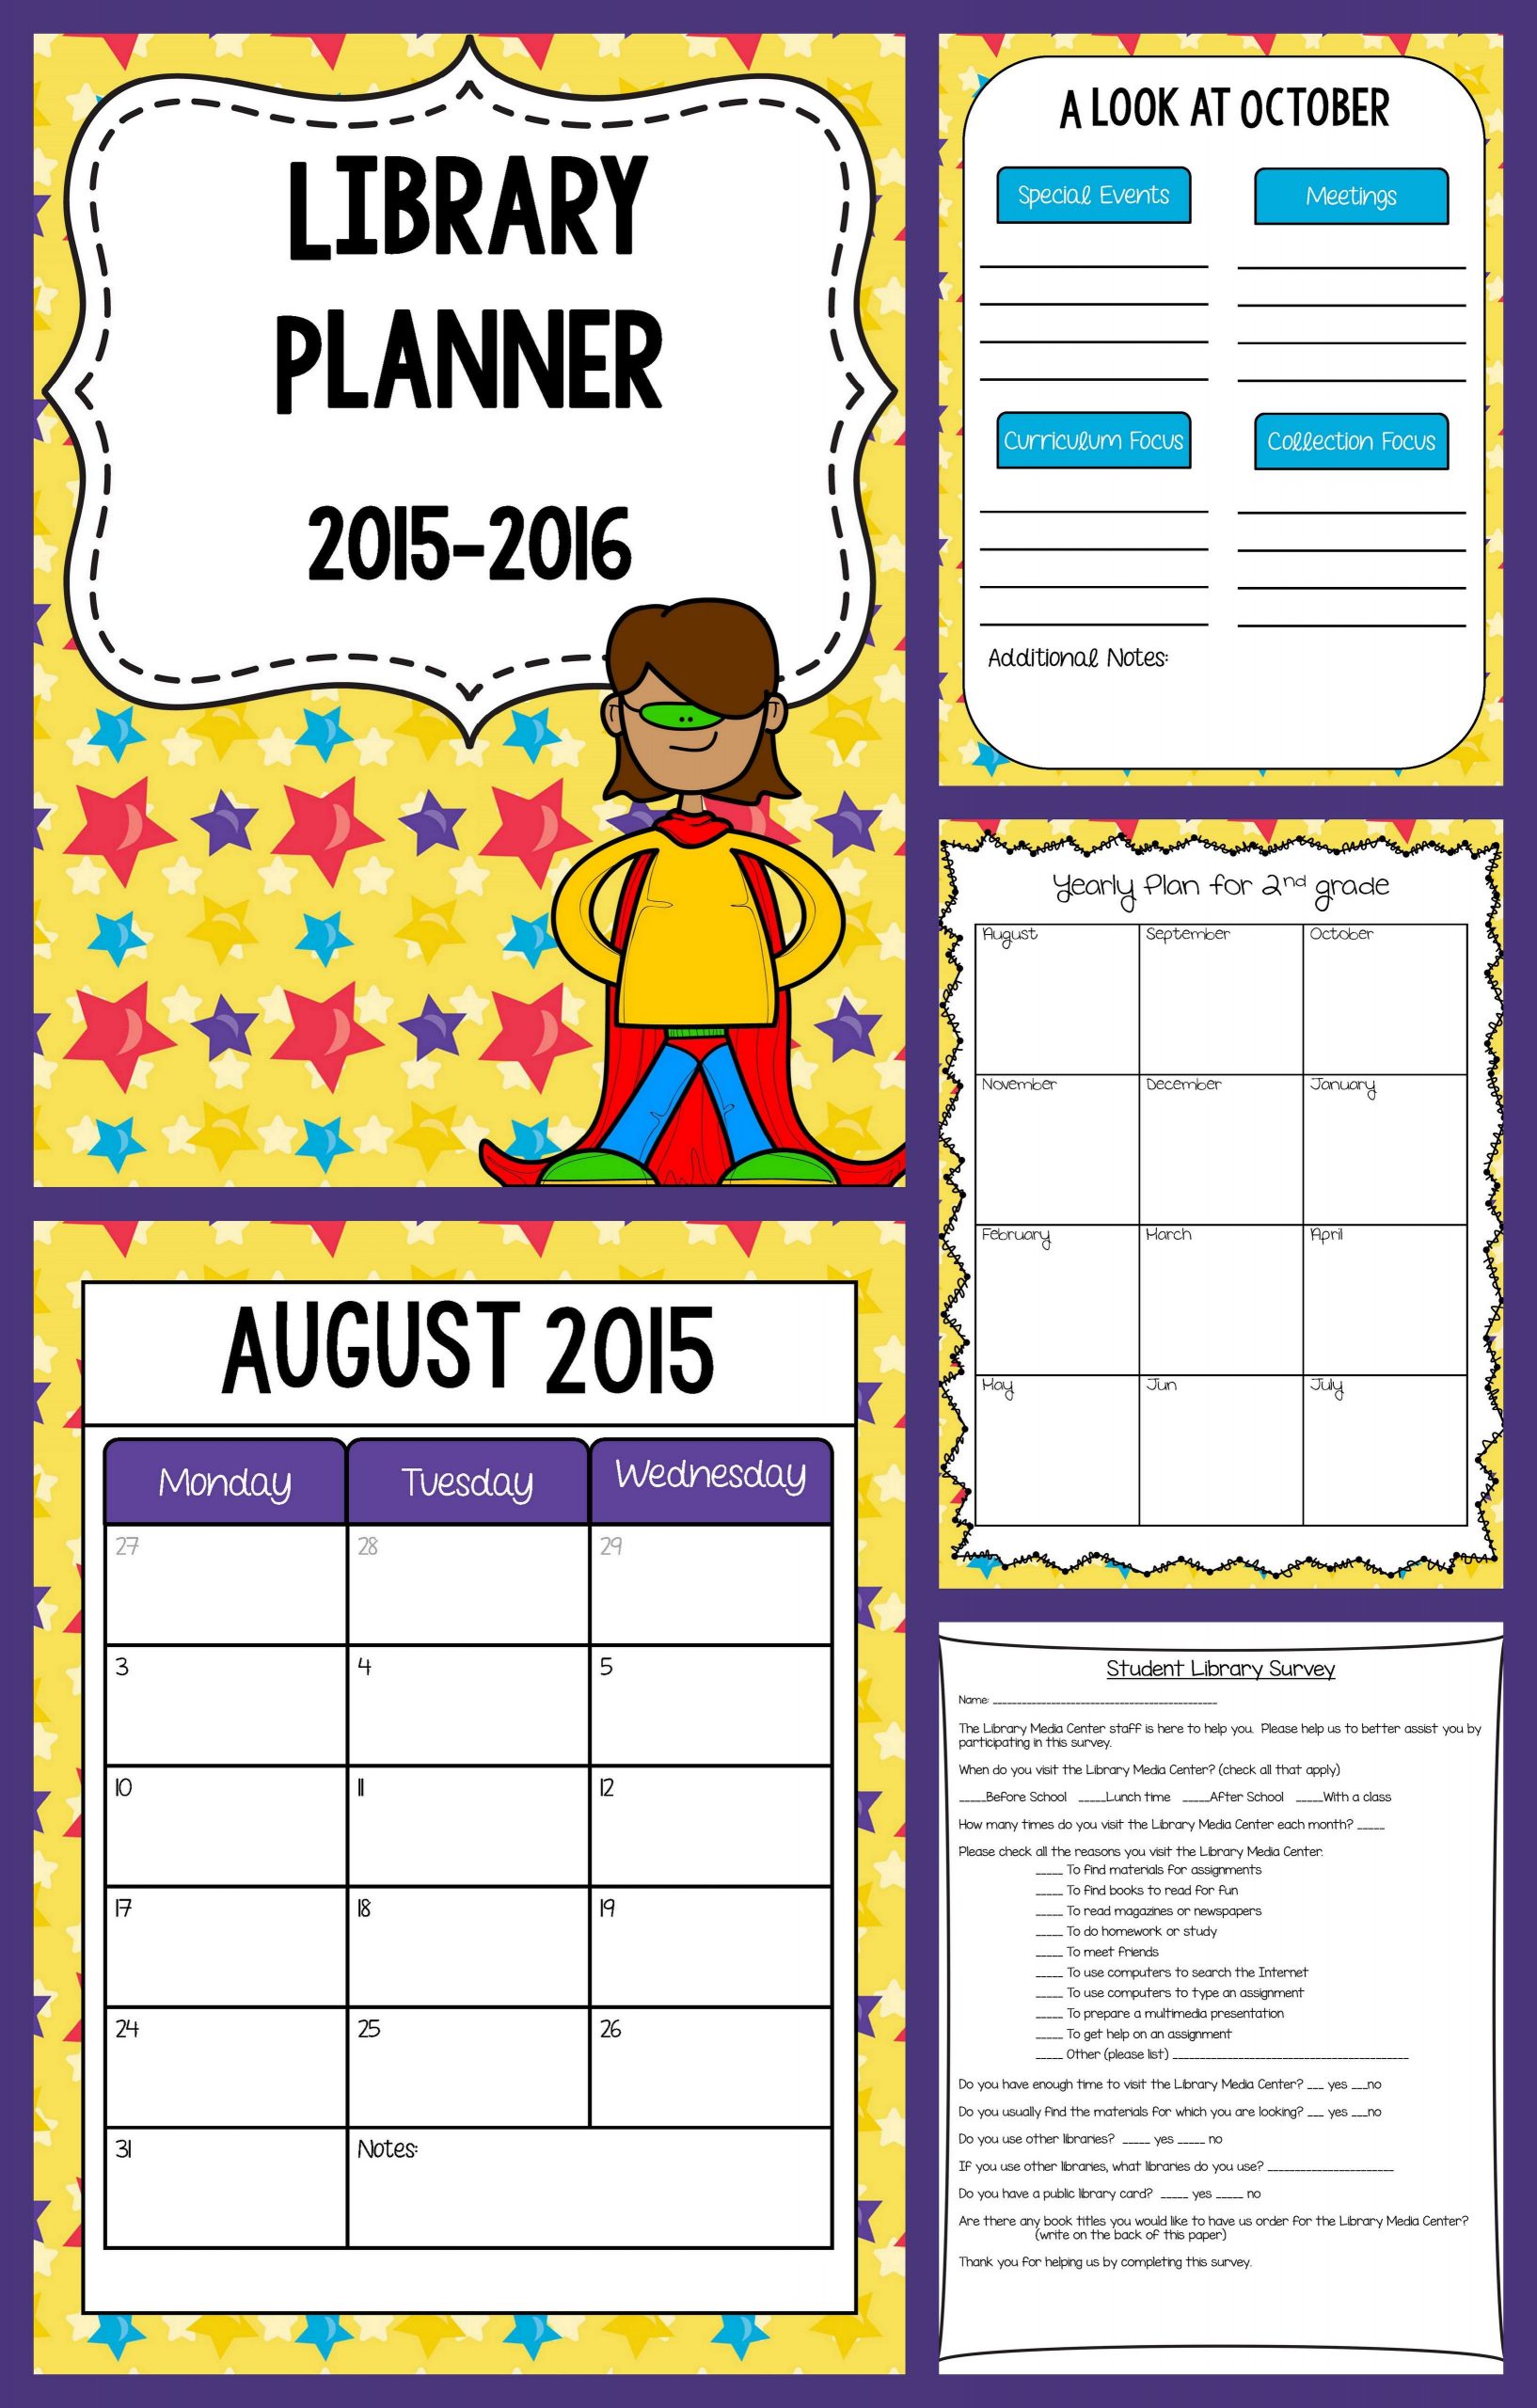 Elementary Library Lesson Plans School Library Planner Superhero theme with Images